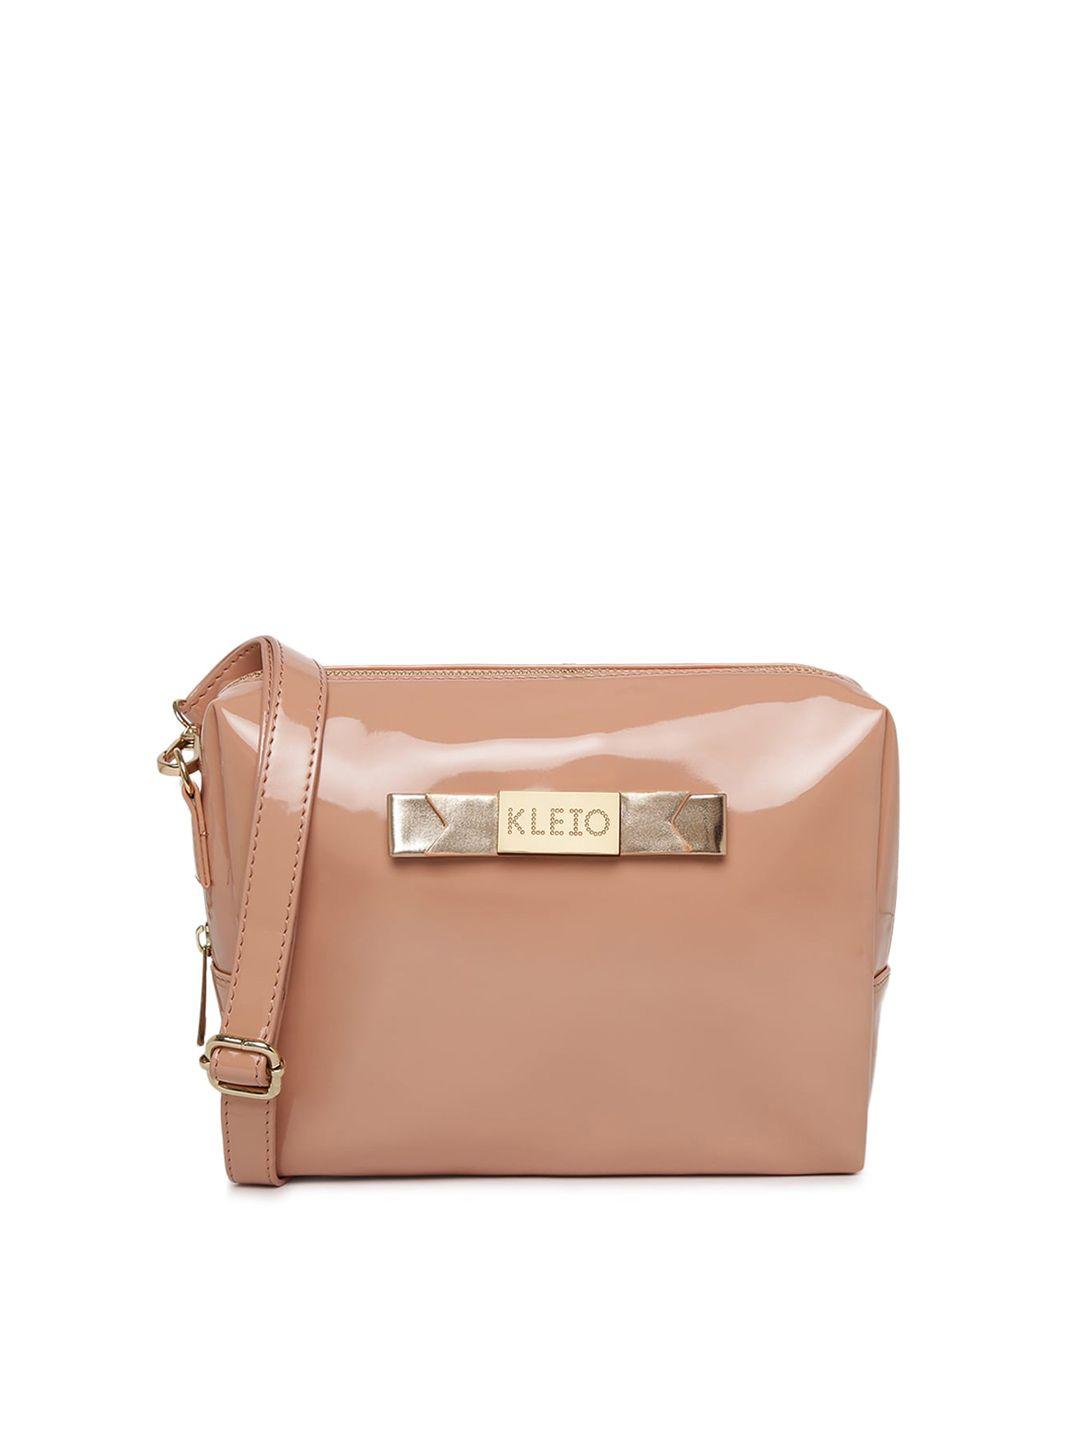 kleio peach-coloured structured sling bag